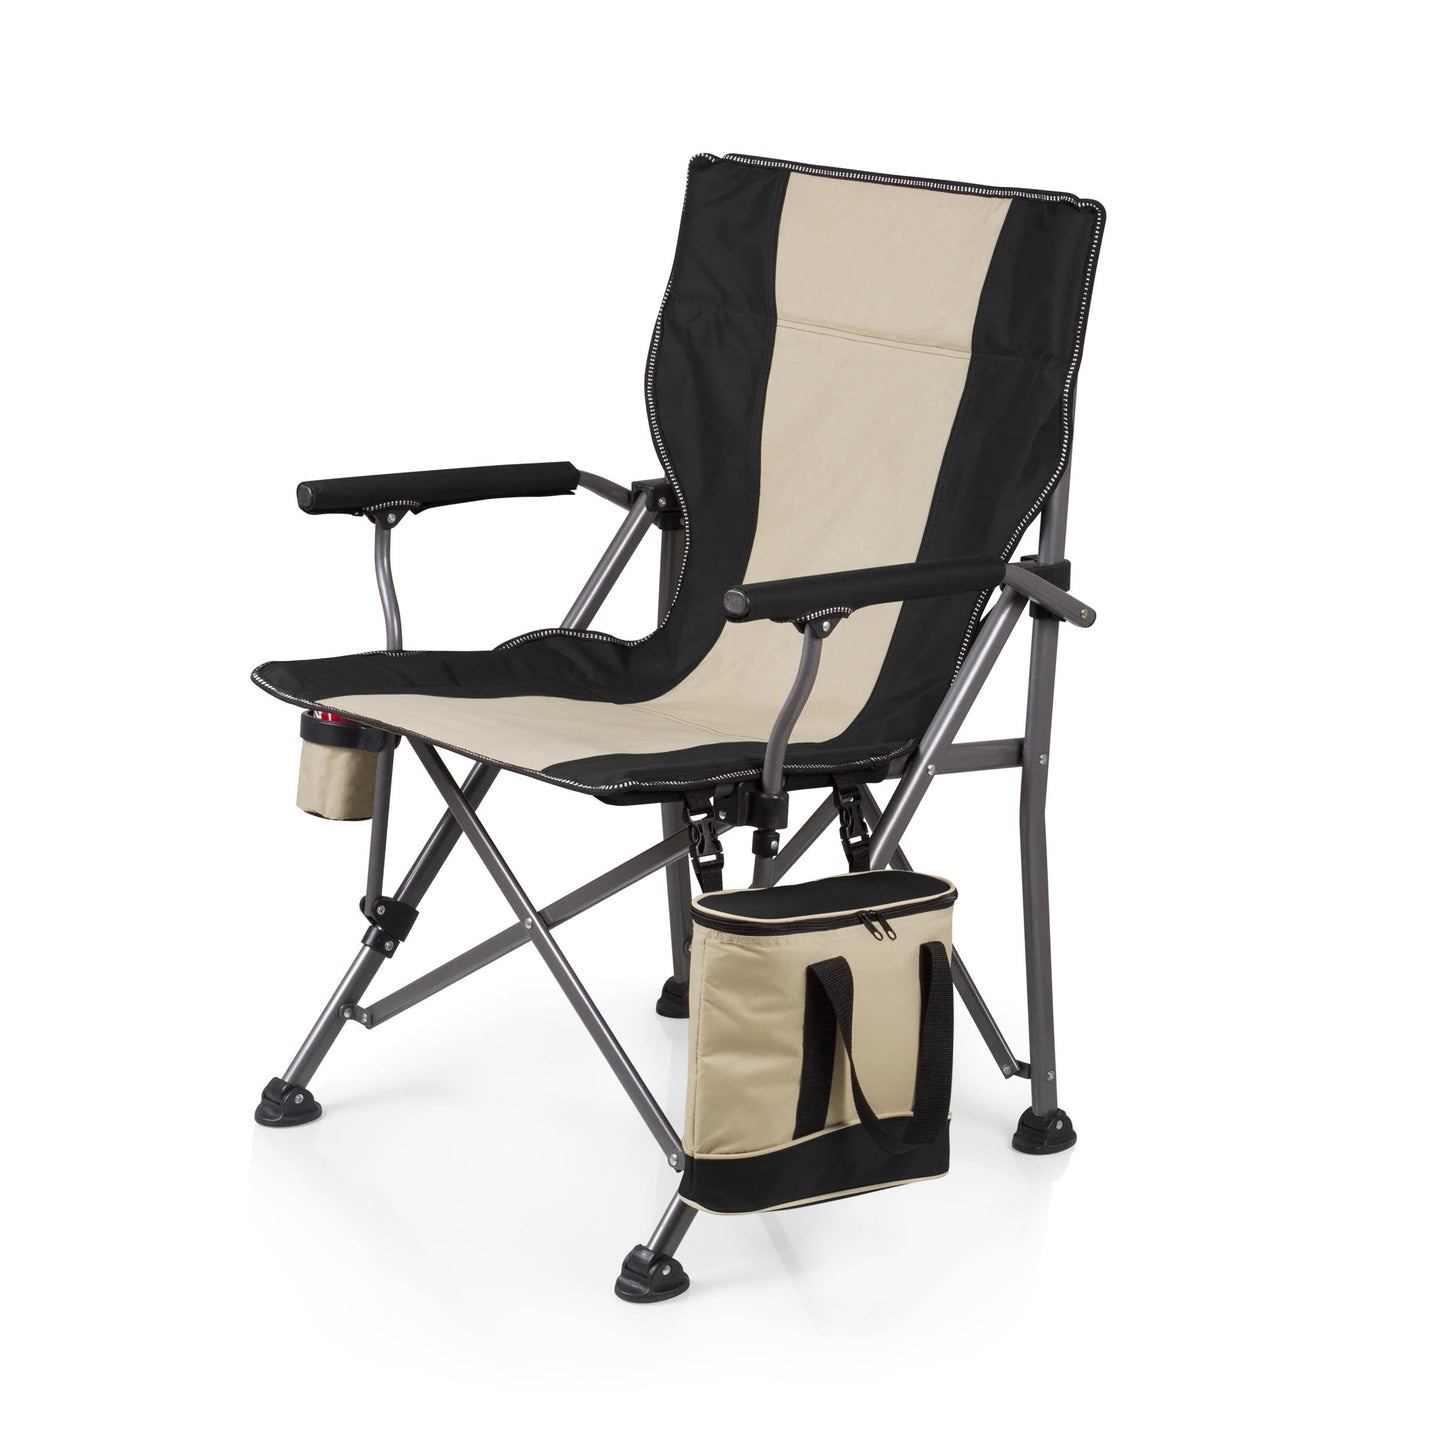 Chicago Bears - Outlander Folding Camping Chair with Cooler